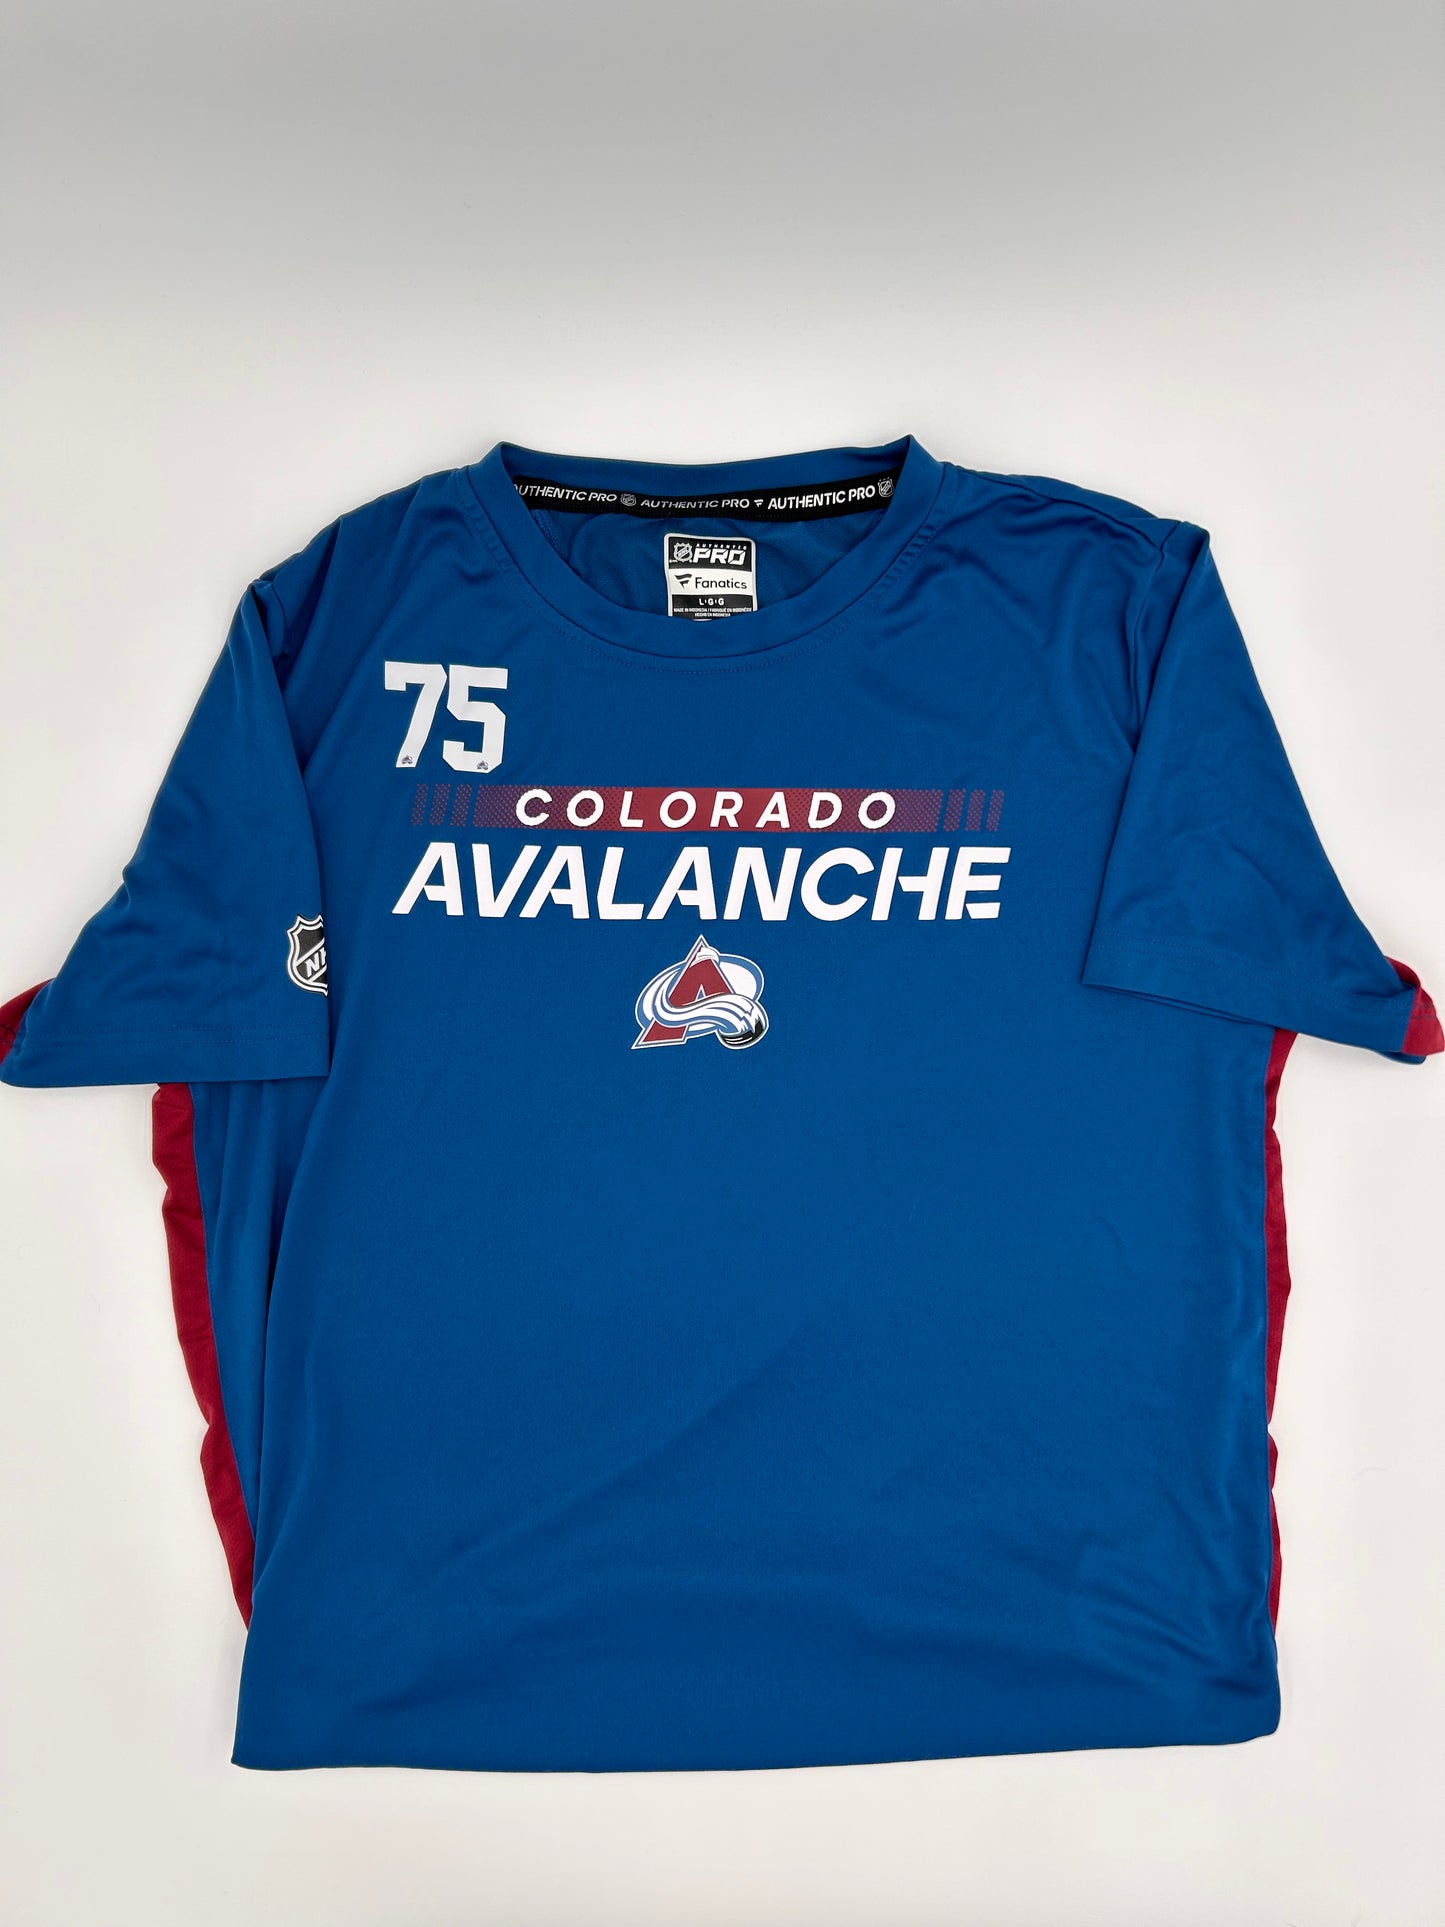 Colorado Avalanche Blue "Camp" Player Issued Shirt